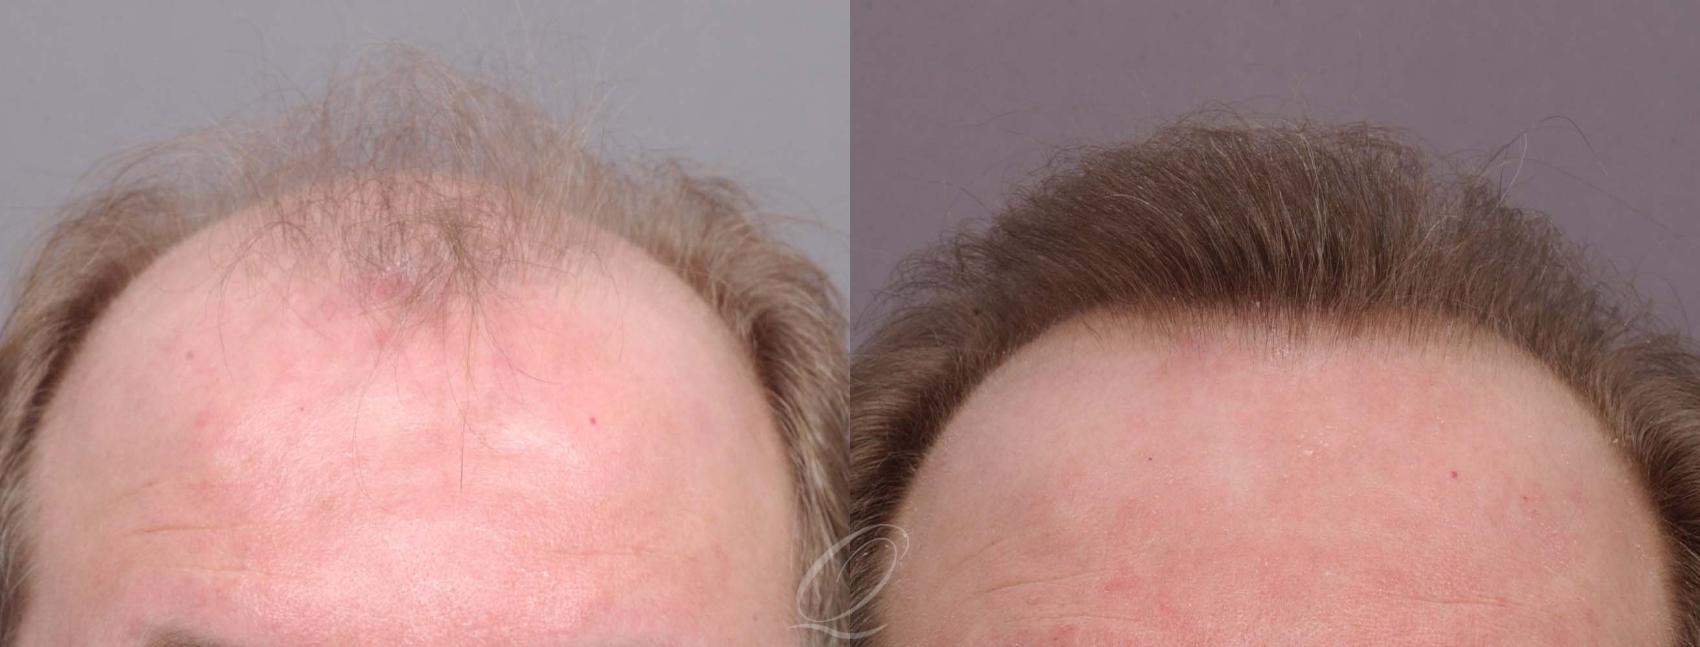 FUT Case 1034 Before & After View #1 | Rochester, NY | Quatela Center for Hair Restoration